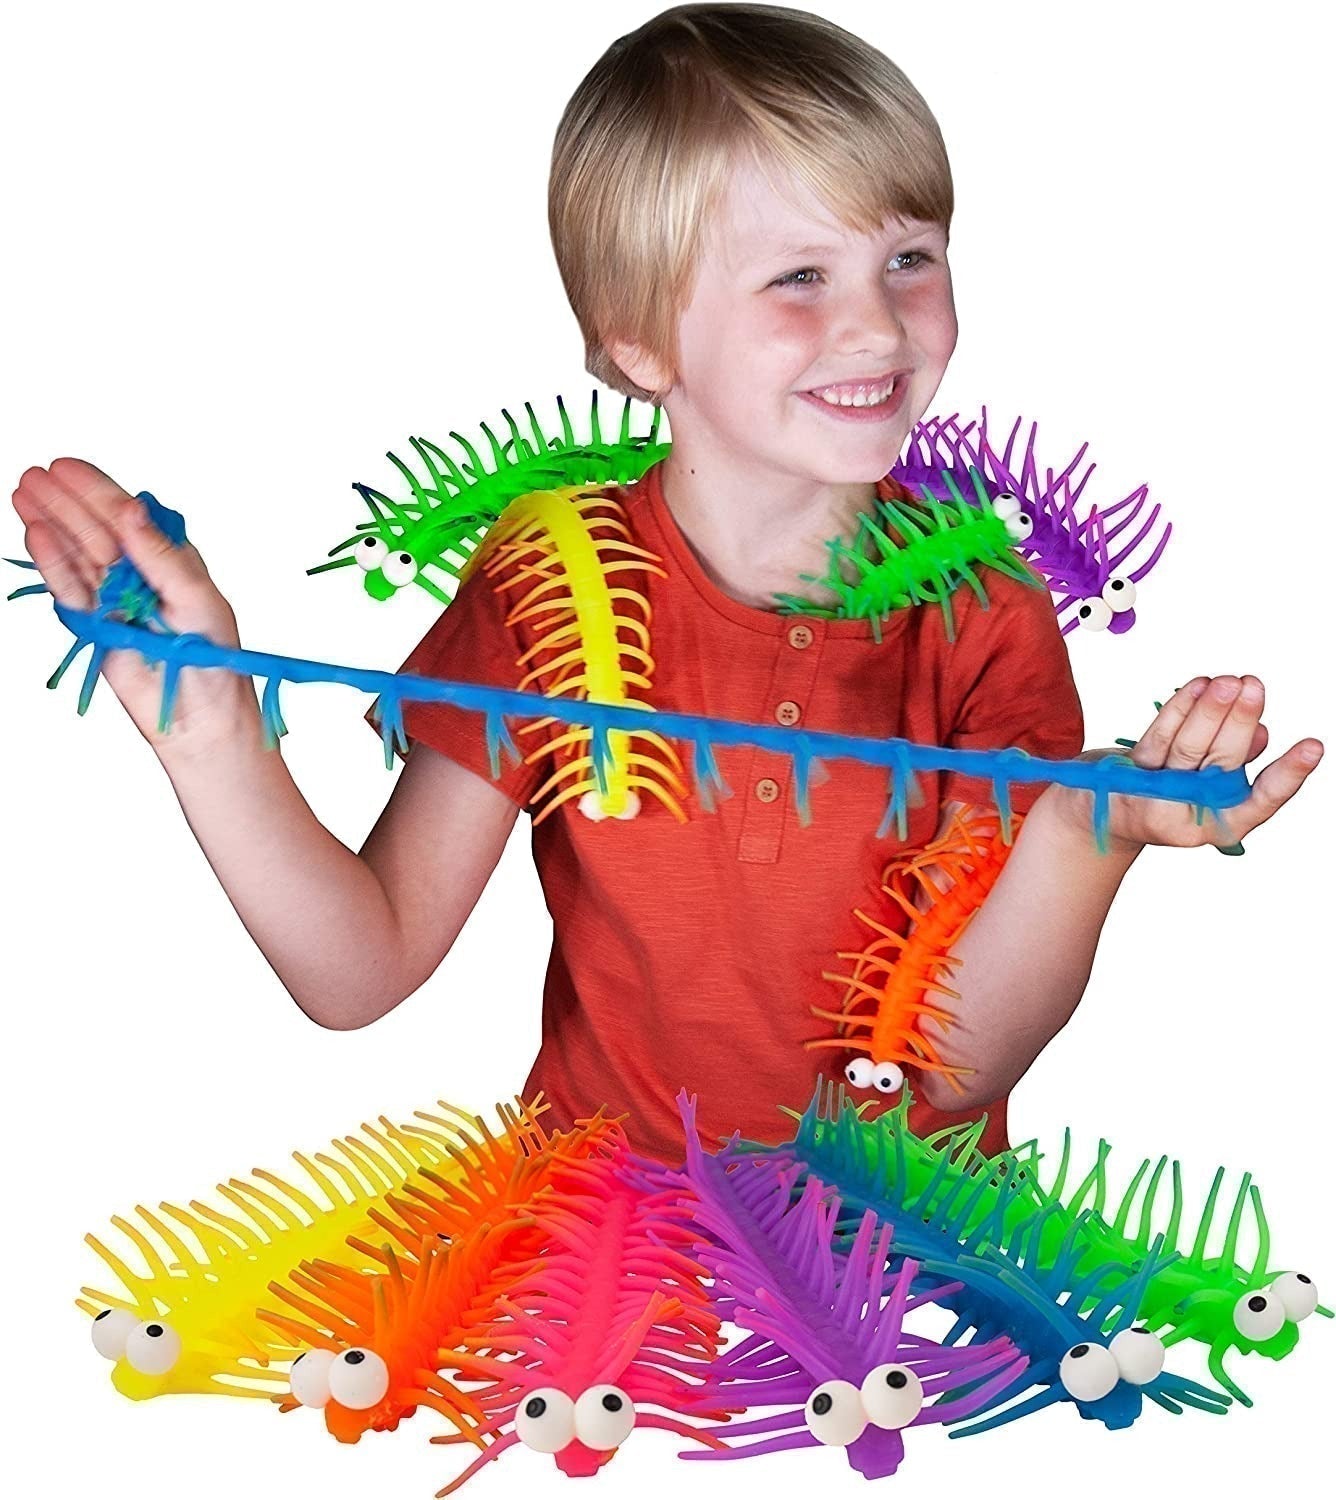 Centipede toy, Soft to touch and super stretchy colourful stretchy Centipede toy The Stretchy centipede stretches to longer lengths many times its standard size. Lovely and cute tactile centipede which is a tactile play delight and one which is very popular amongst children and adults. The Stretchy Centipede toy also responds very well under UV black light to create a stunning visual effect. A fantastic way to experience a new texture and sensation and this is perfect for children who maybe tactile defensiv